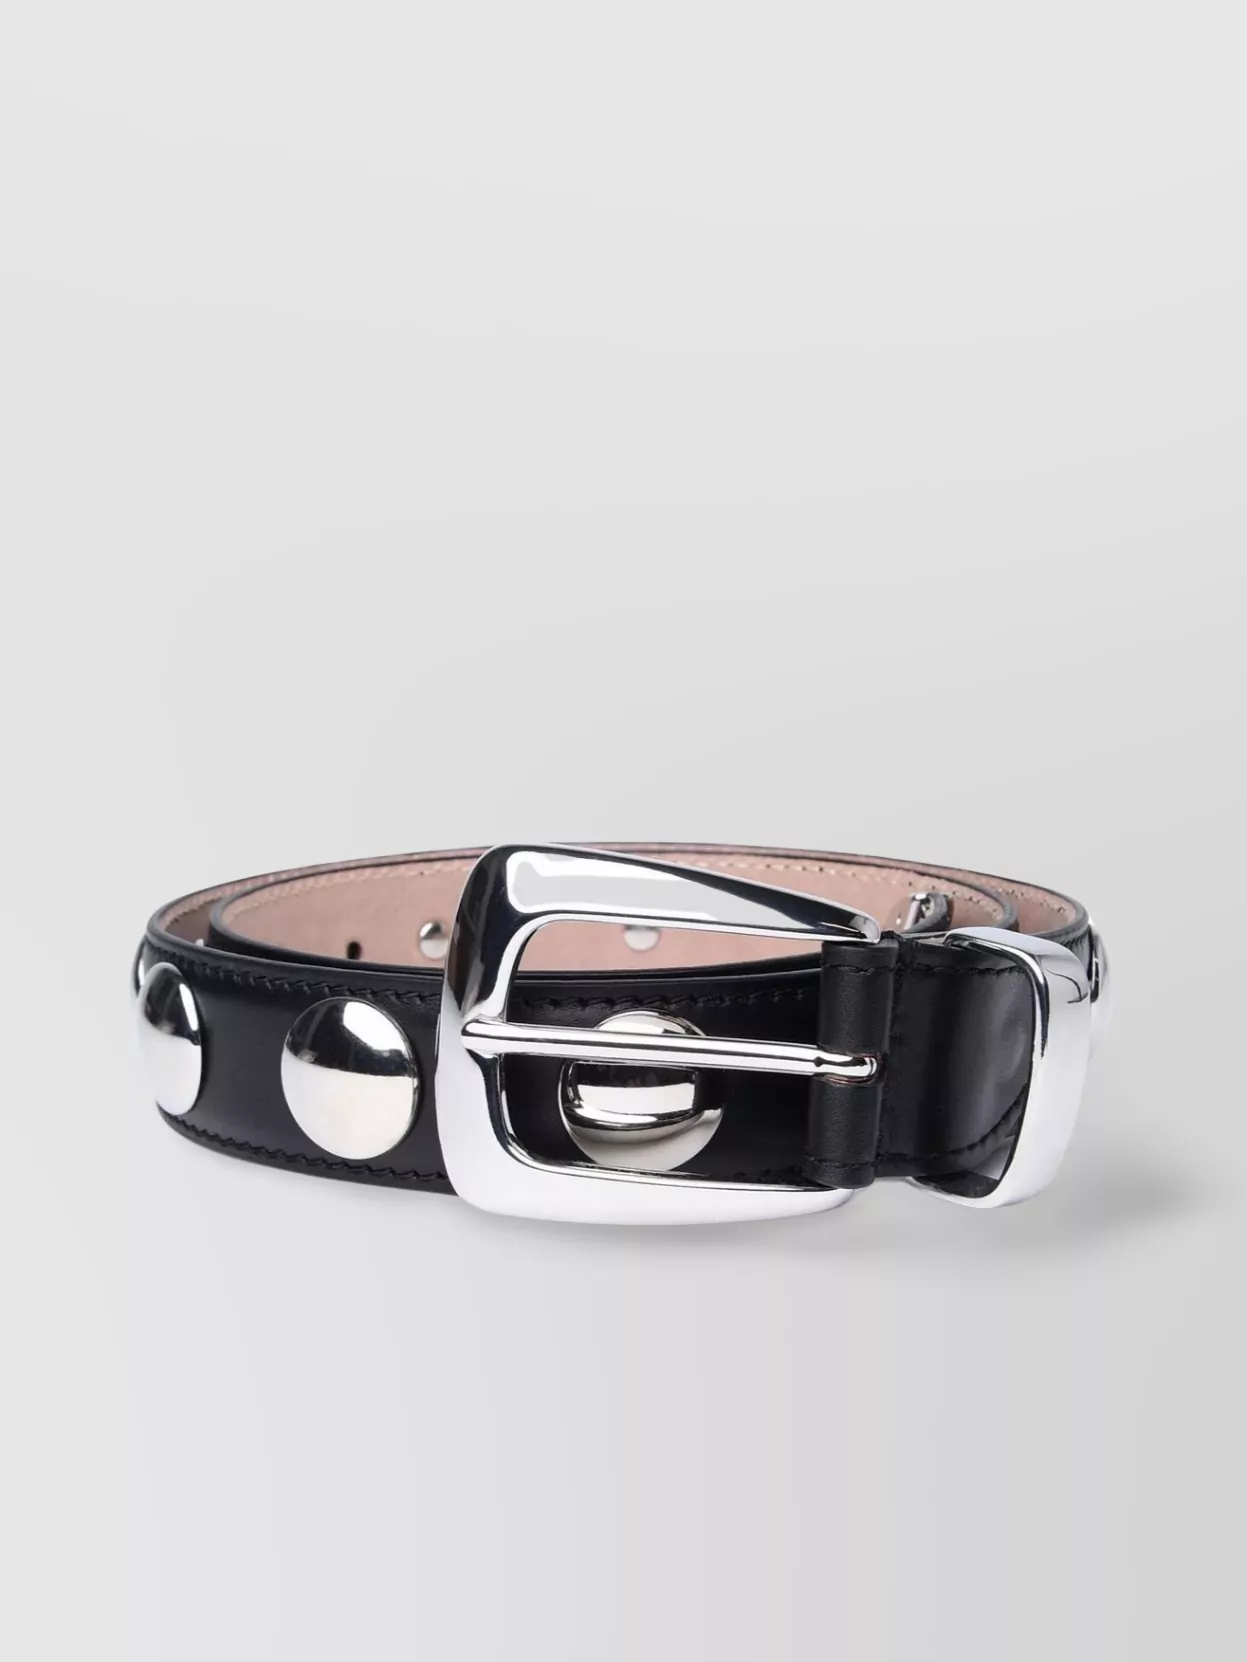 Khaite Leather Belt With Adjustable Length And Studded Detail